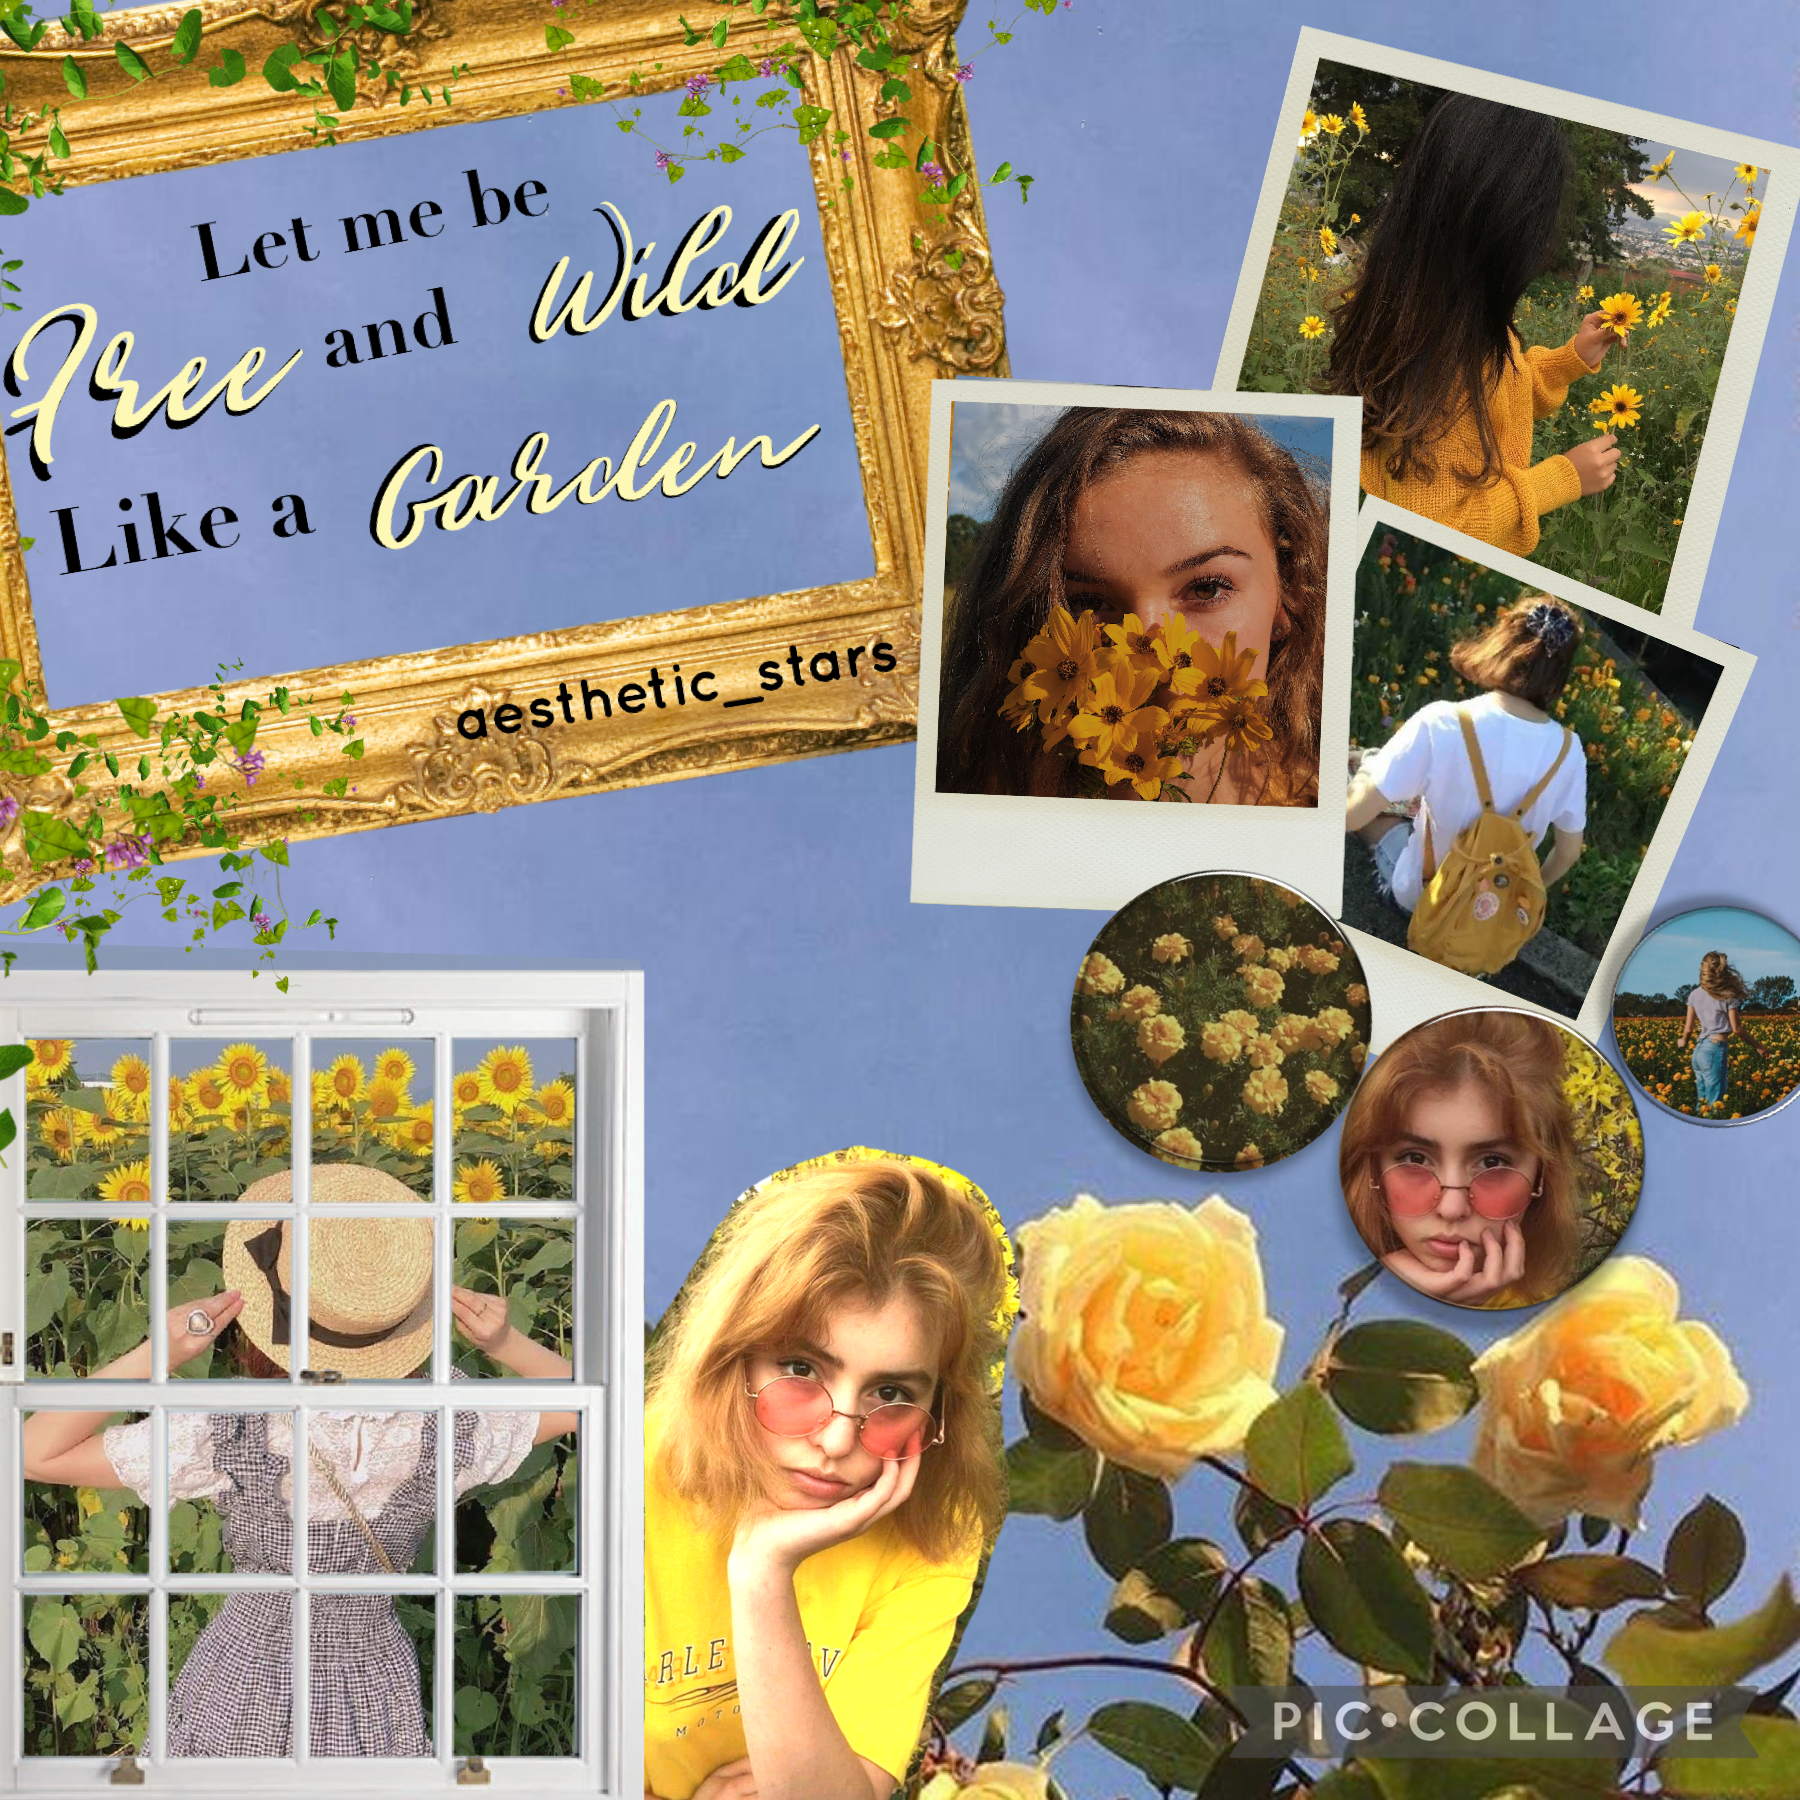 
🌸Tap🌸
This is the first nature collage for my series!! Let me be free and wild like a garden. The theme is yellow and green nature. Hope you like it, Collage 2 is coming soon